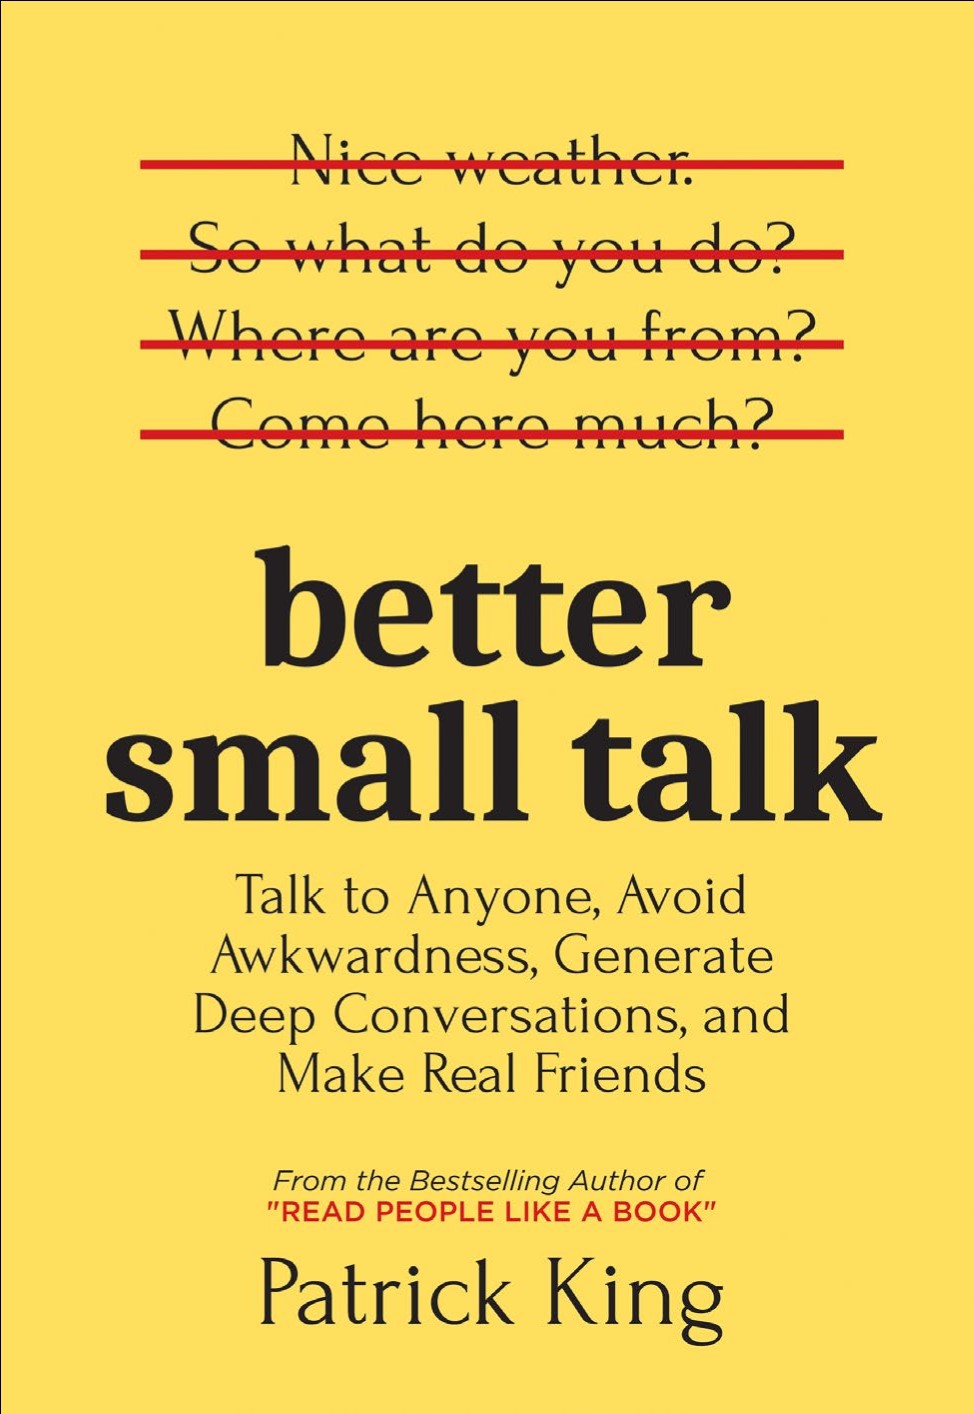 Better Small Talk: Talk to Anyone, Avoid Awkwardness, Generate Deep Conversations and Make Real Friends - MPHOnline.com